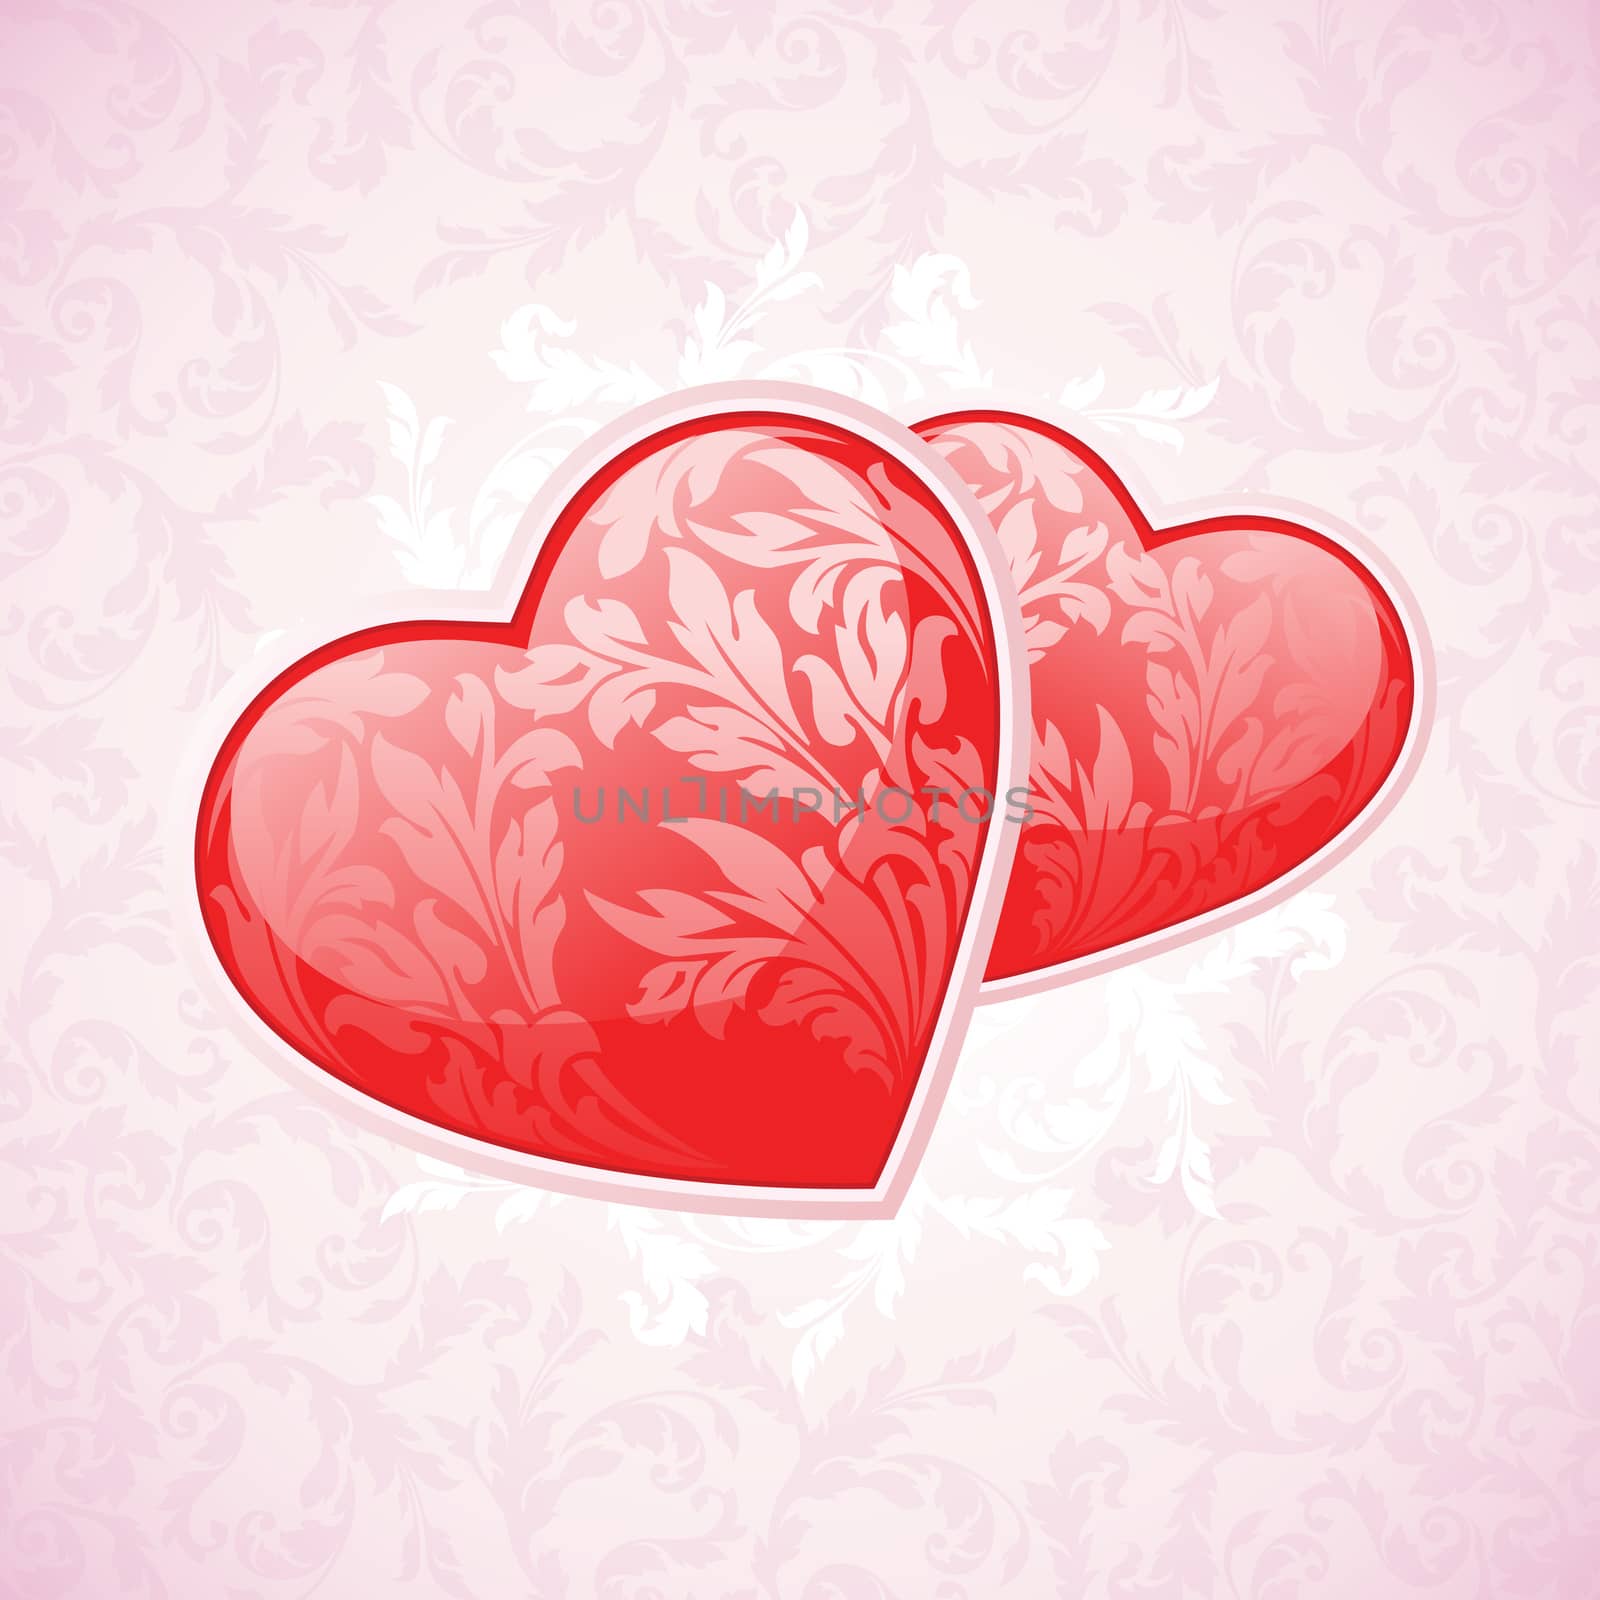 Happy Valentine's Day Floral Background with two Hearts